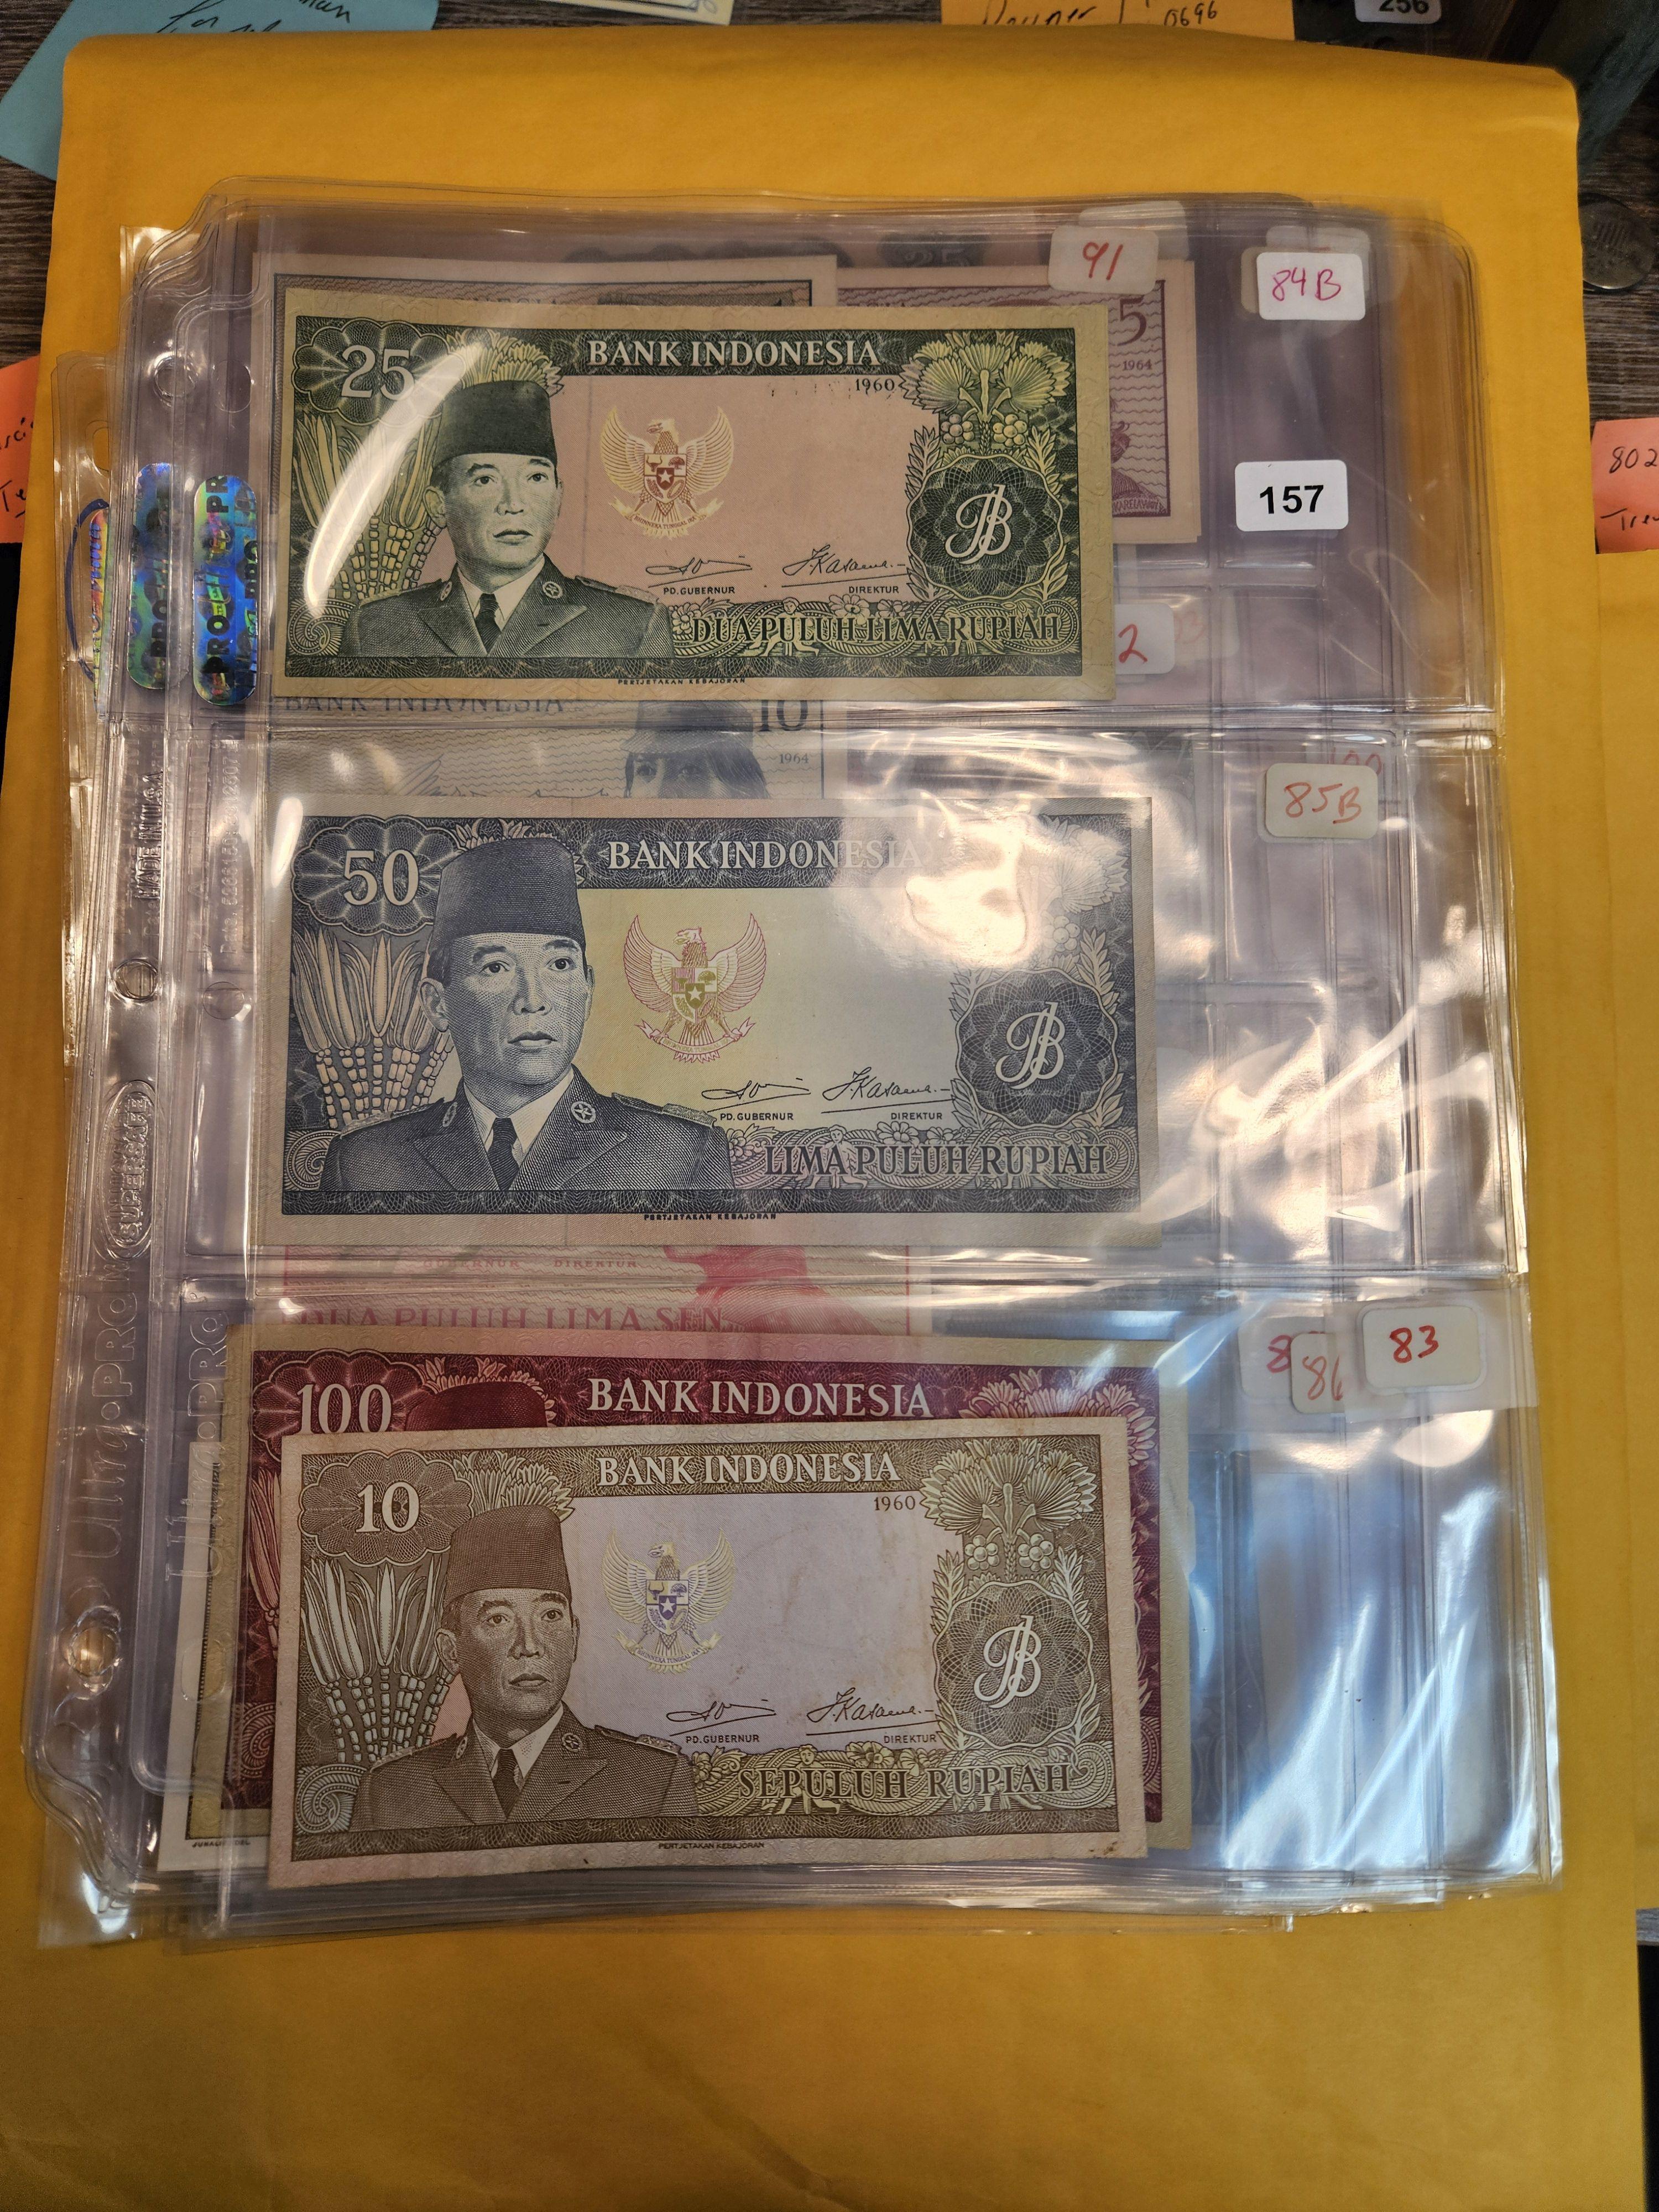 Nuther large group of nice notes from Indonesia